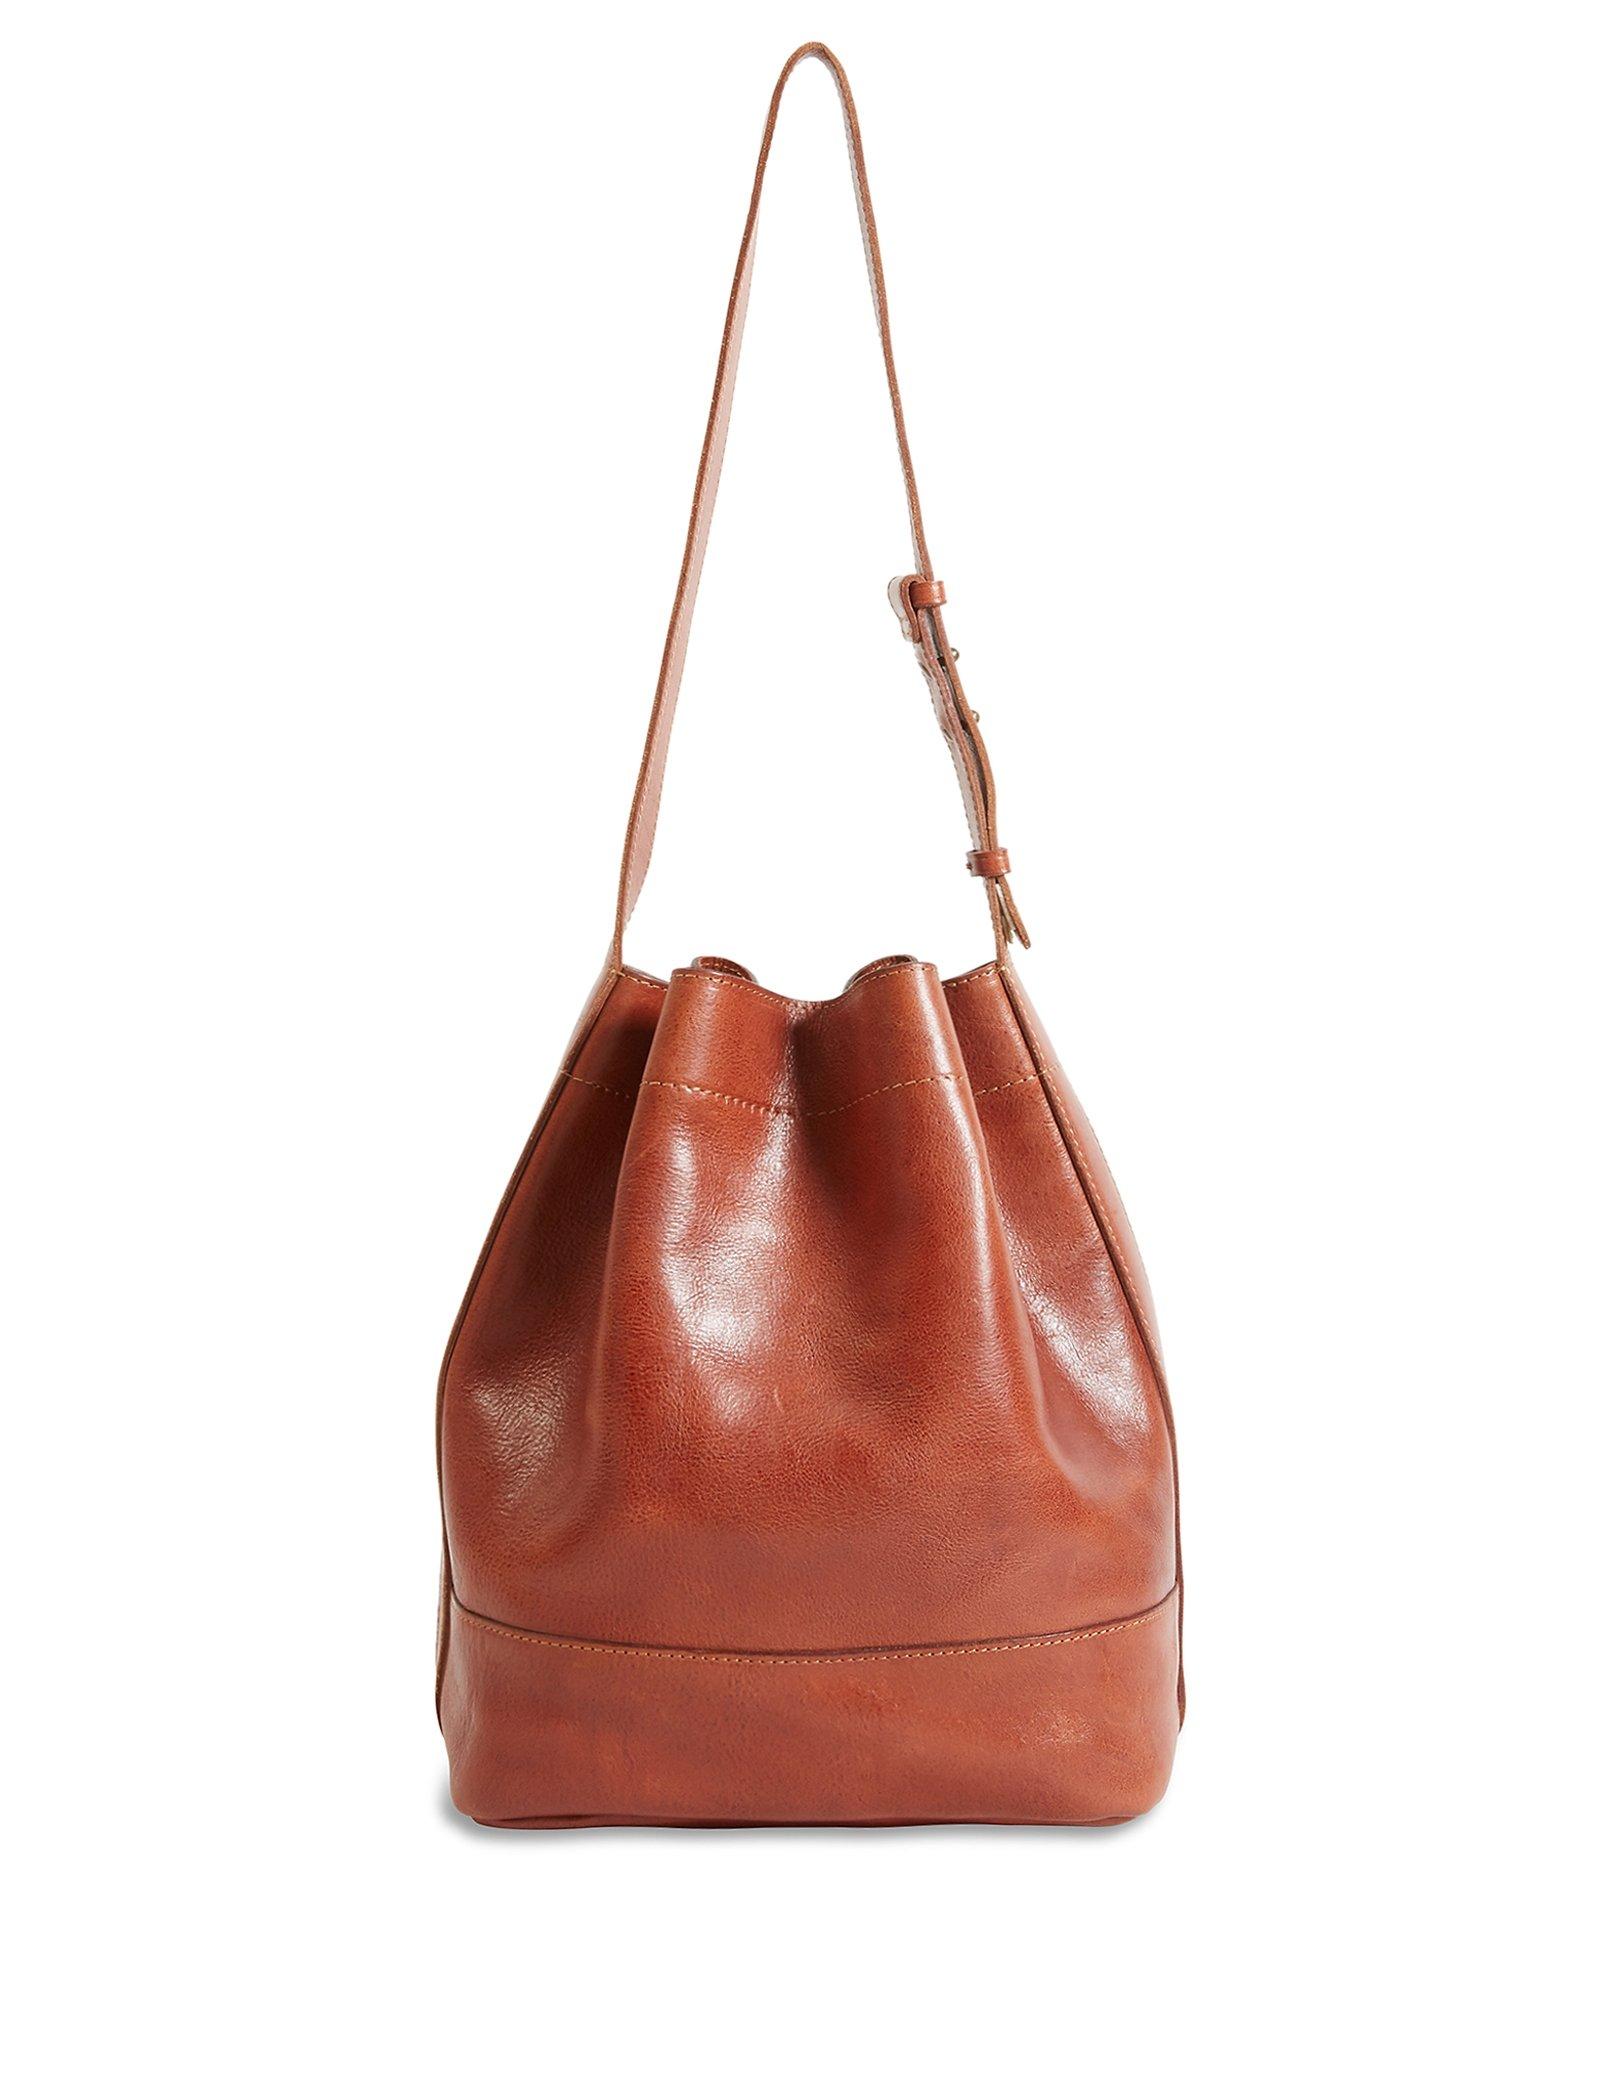 THE POINT DRAWSTRING BAG | Lucky Brand